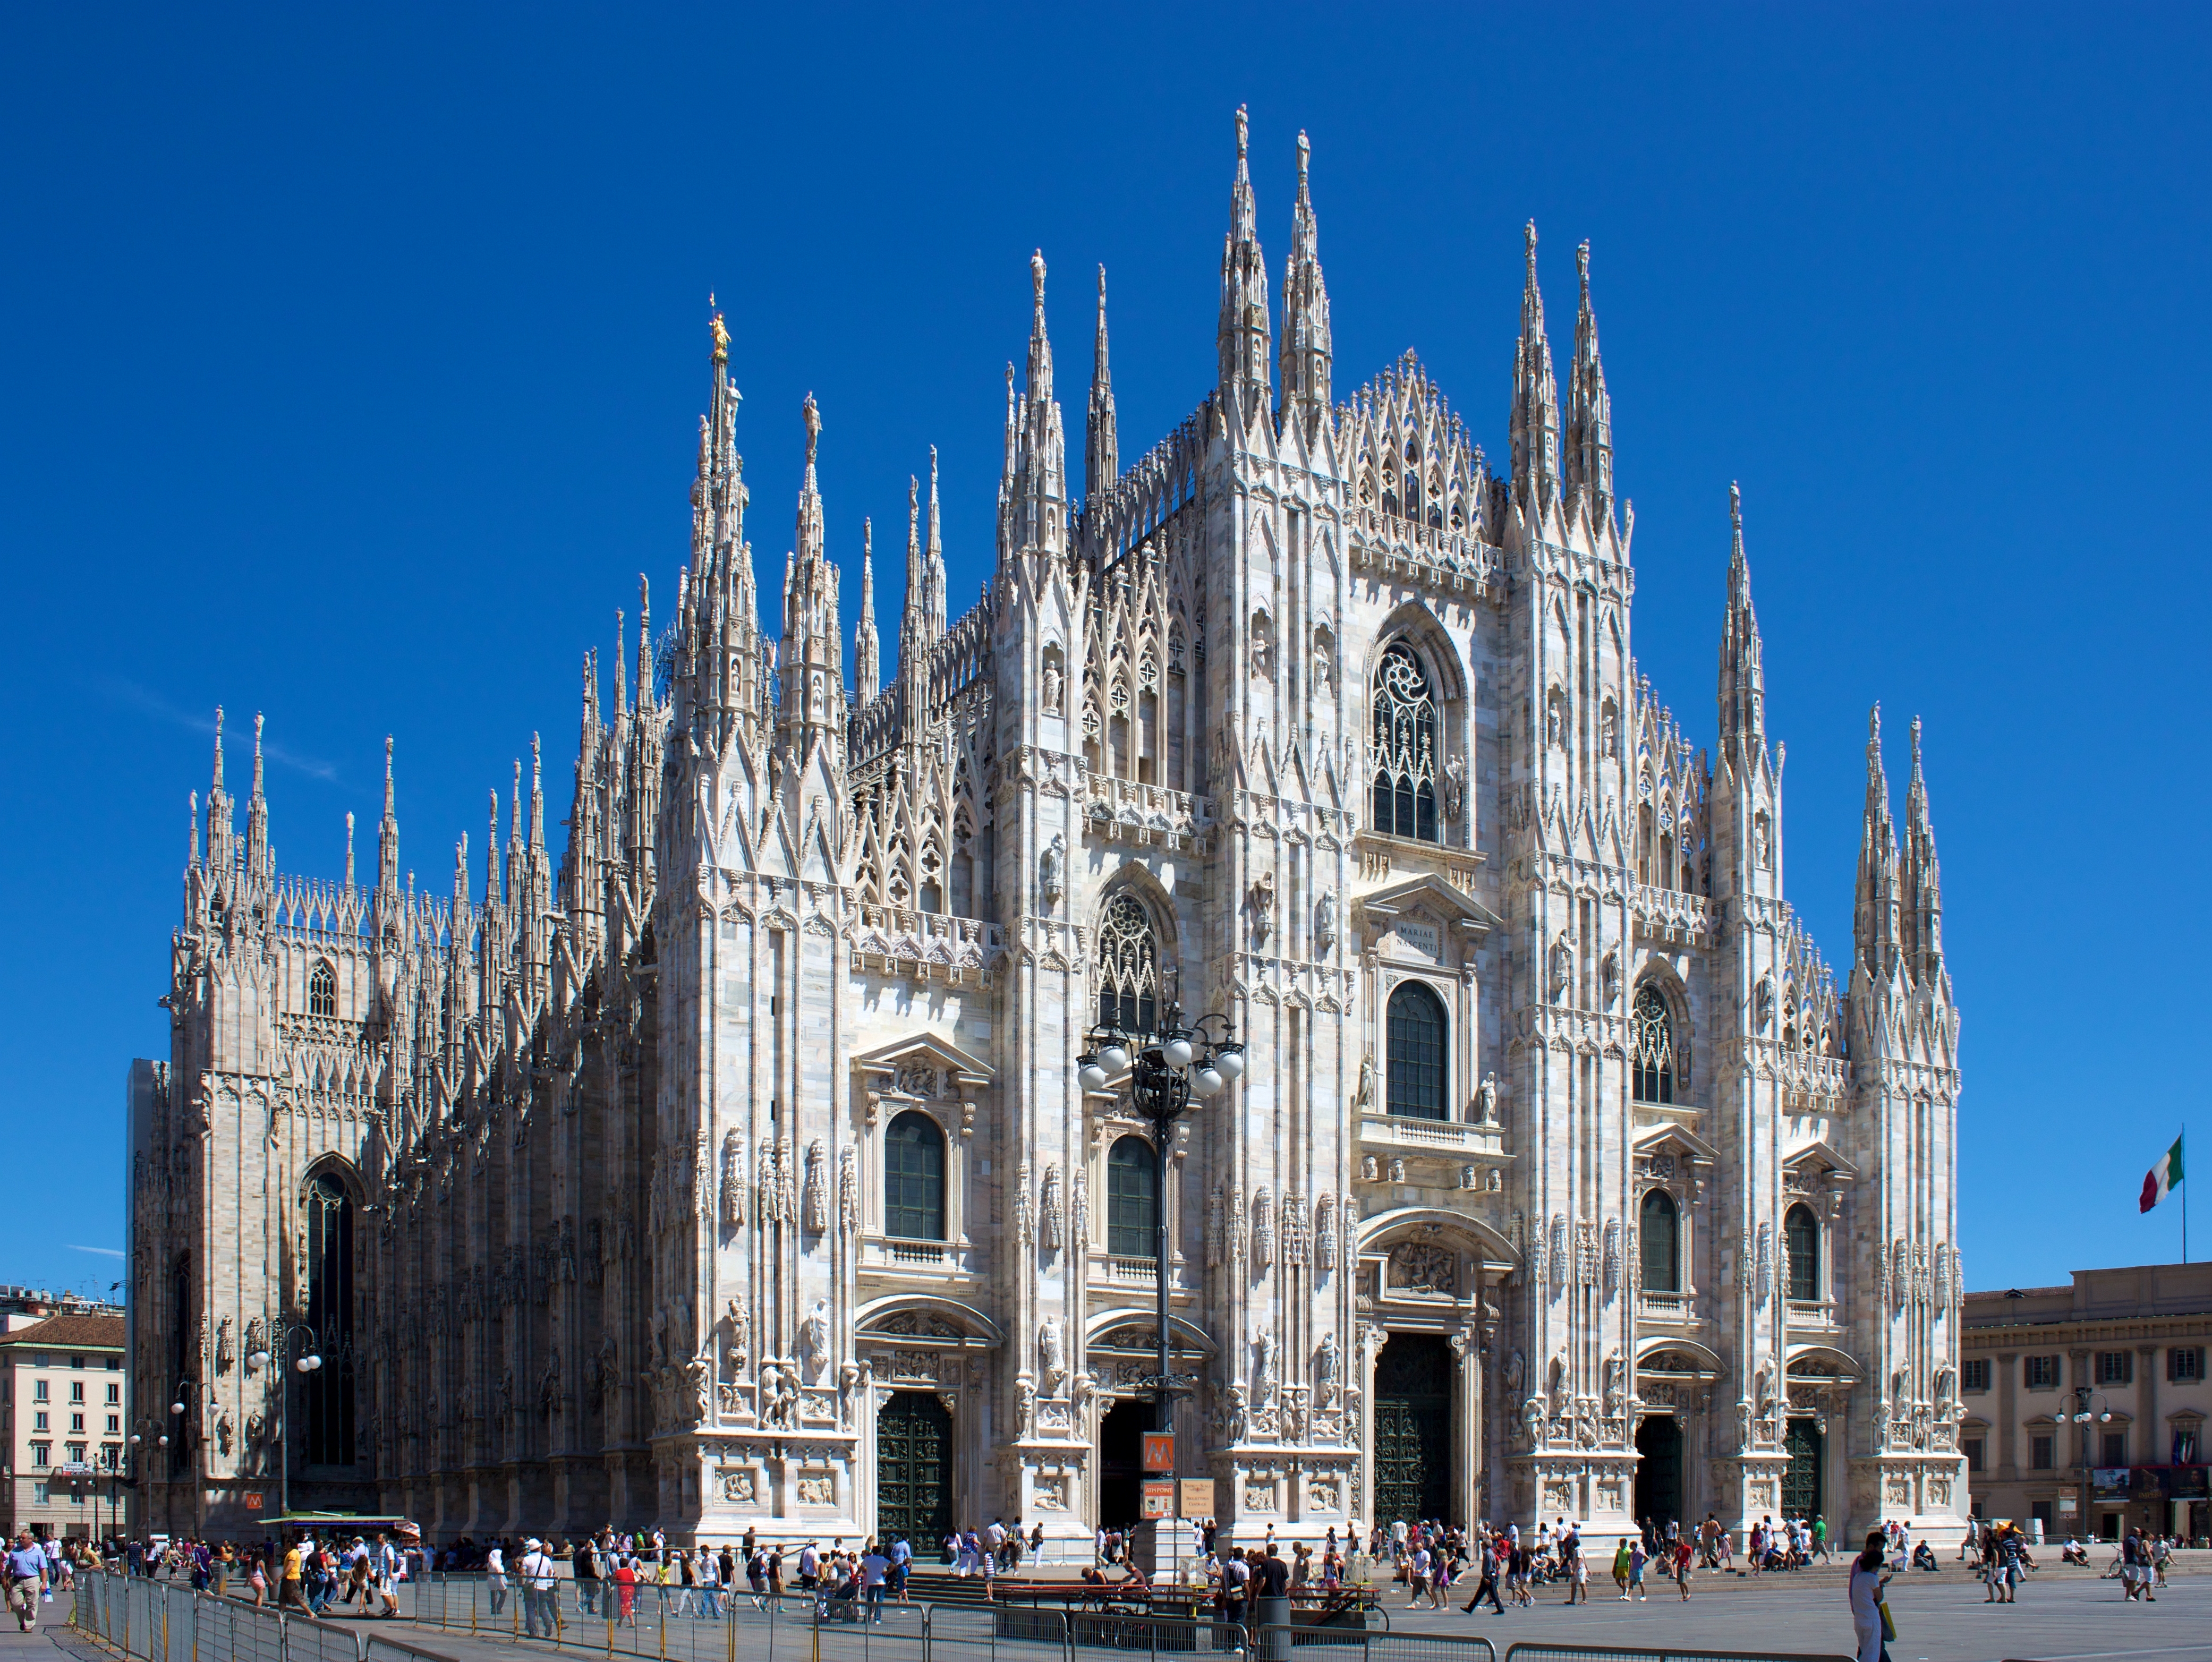 https://upload.wikimedia.org/wikipedia/commons/7/70/Milan_Cathedral_from_Piazza_del_Duomo.jpg